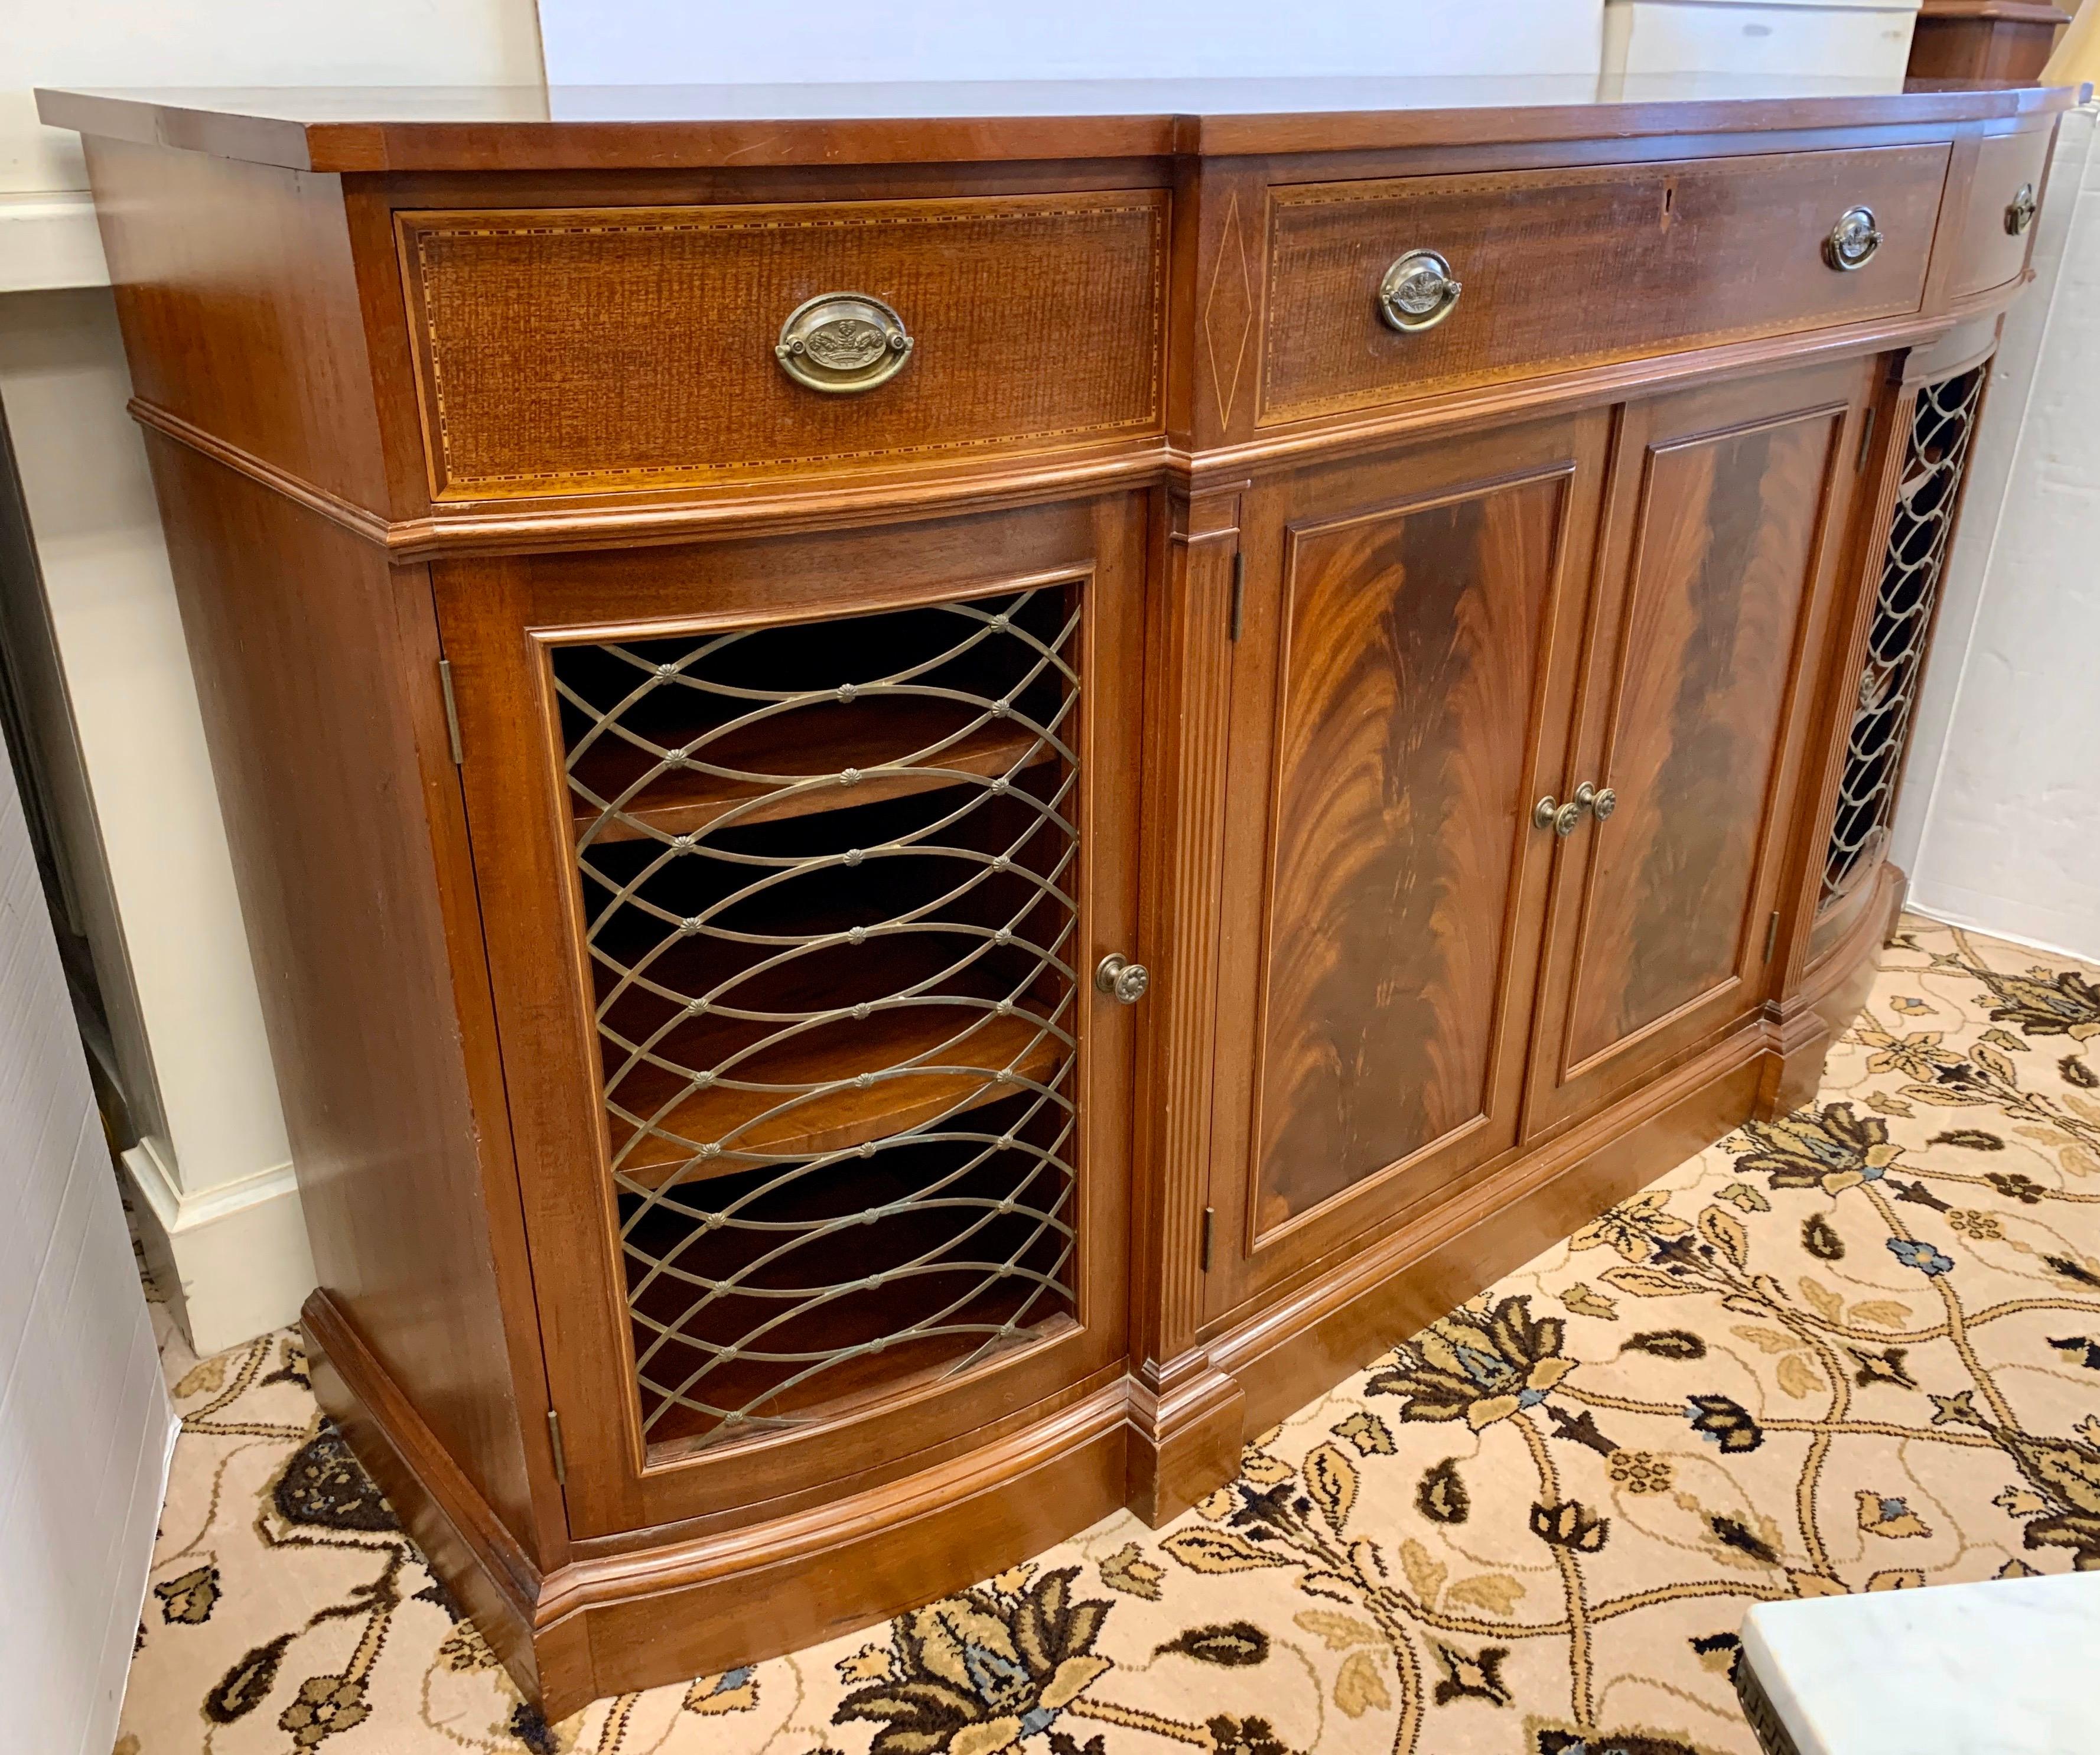 Rare Margolis exceptionally handcrafted mahogany sideboard with center flame mahogany doors flanked by brass grillwork doors. Has three more drawers for flatware, etc. Signed Margolis on back.